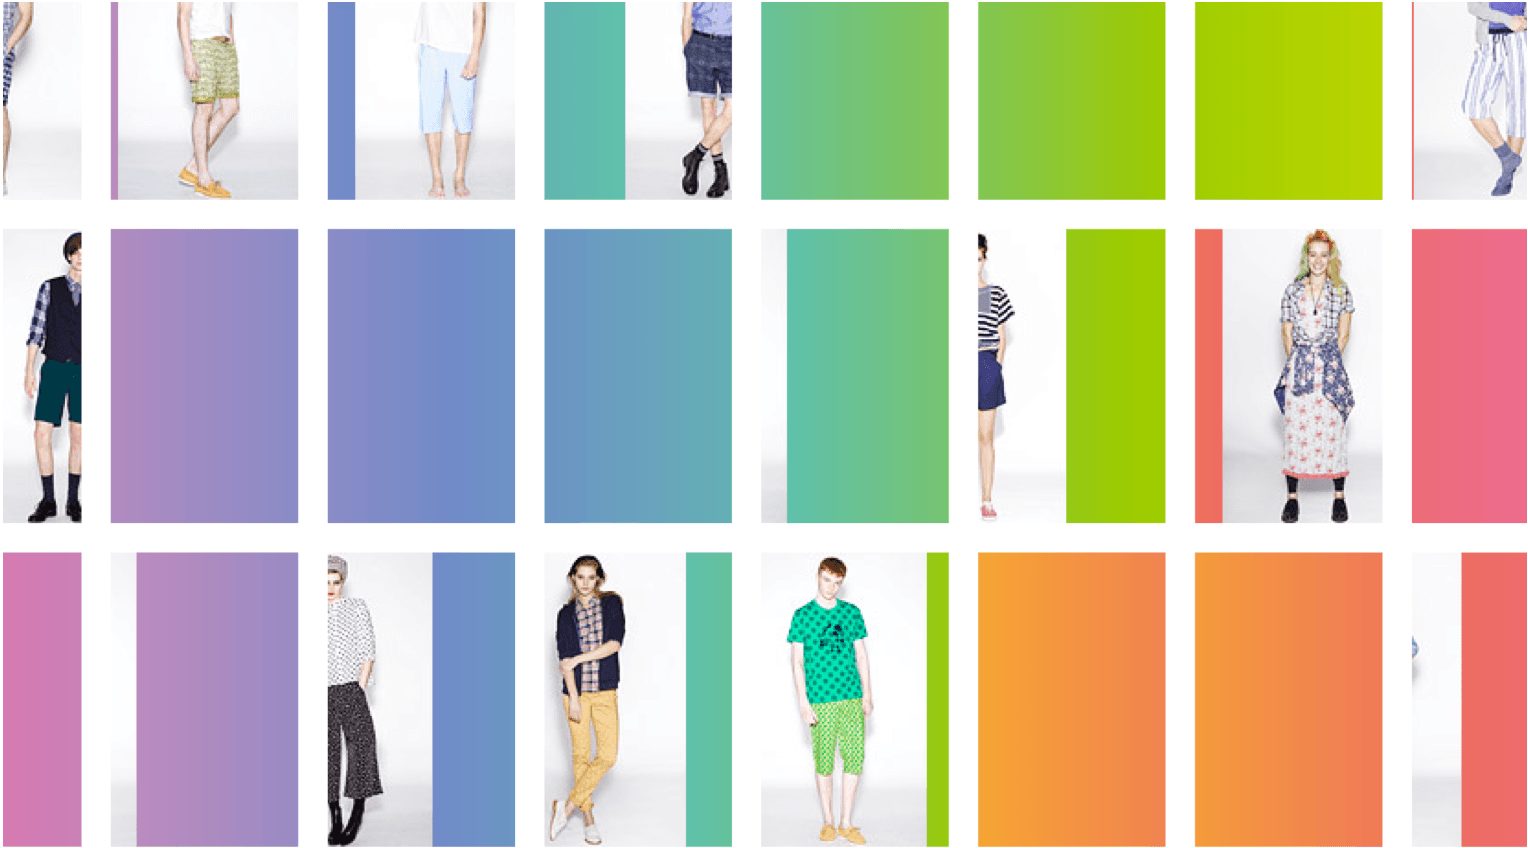 Uniqlo – A well executed glocal Digital and Social Media Marketing strategy